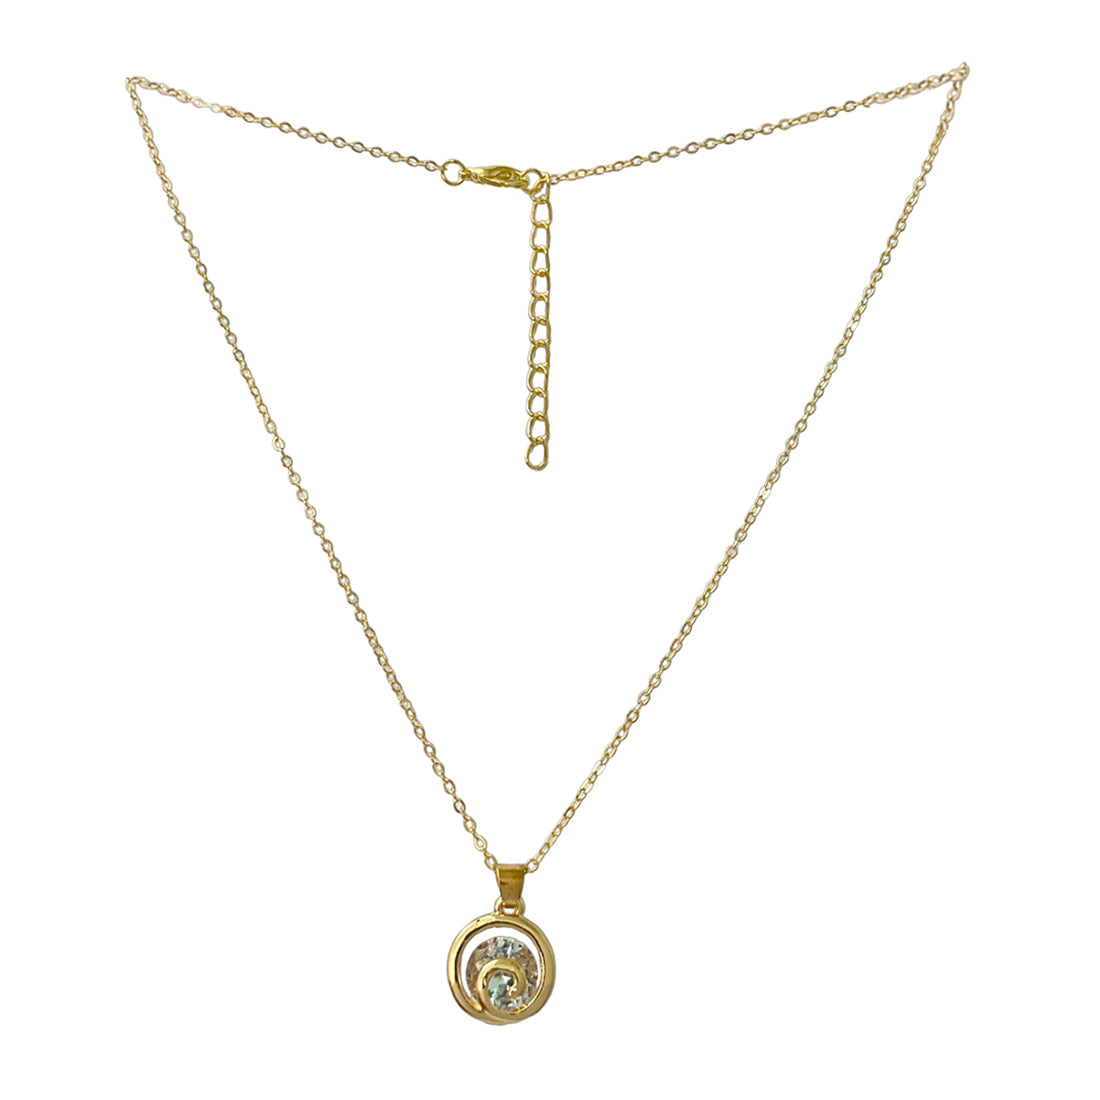 Ayesha Mini Spiral with Diamante Stud Pendant Gold-Toned Necklace